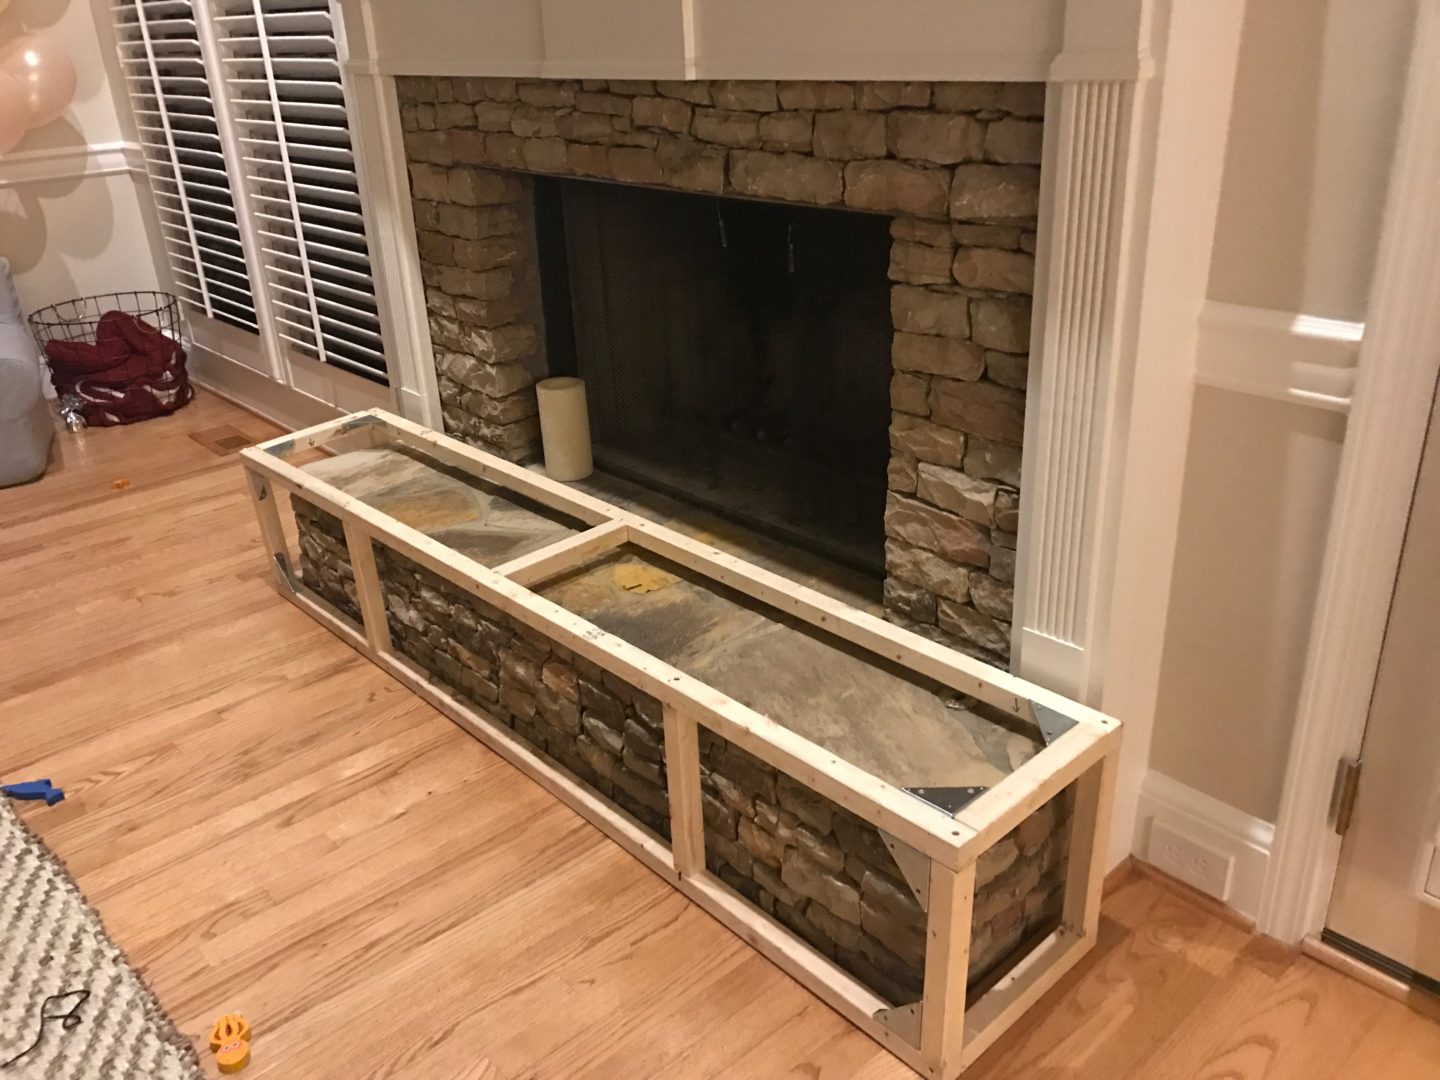 How to baby-proof your fireplace - Reviewed